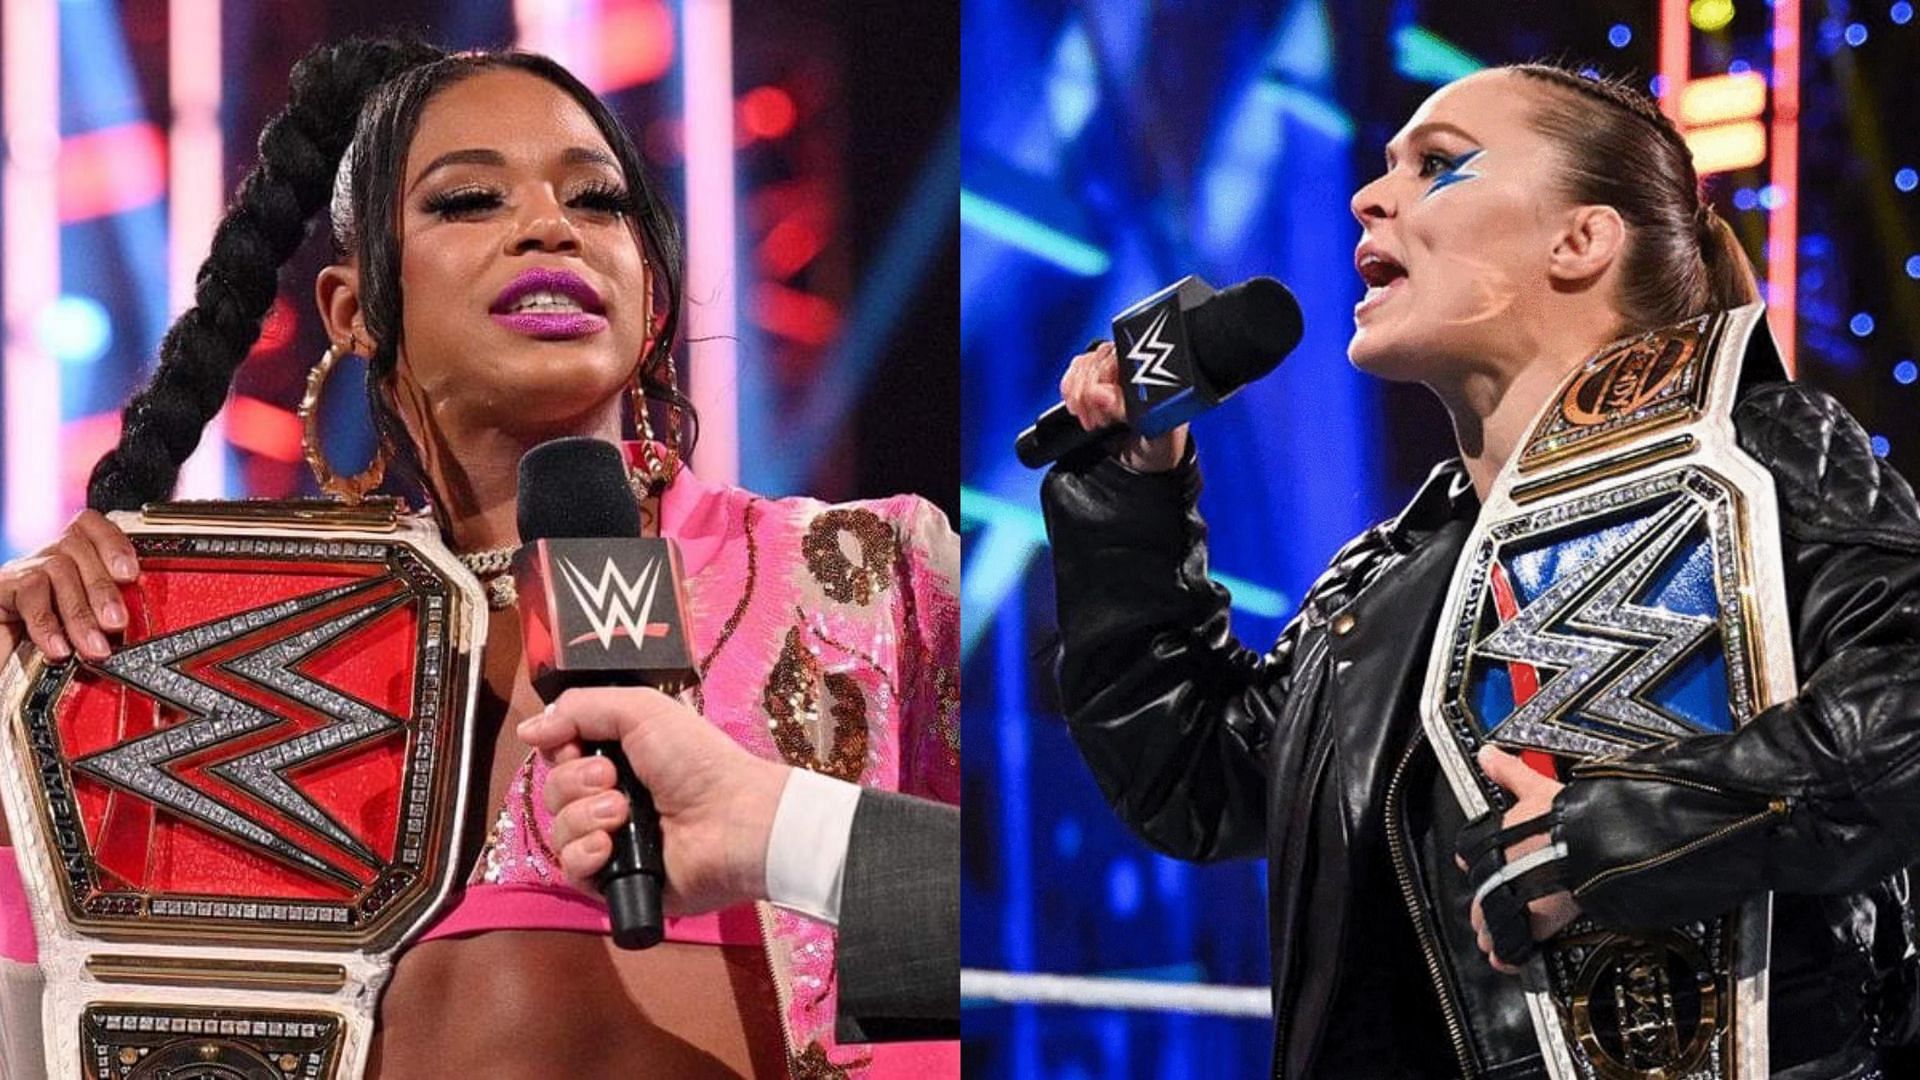 Bianca Belair and Ronda Rousey currently sit atop WWE